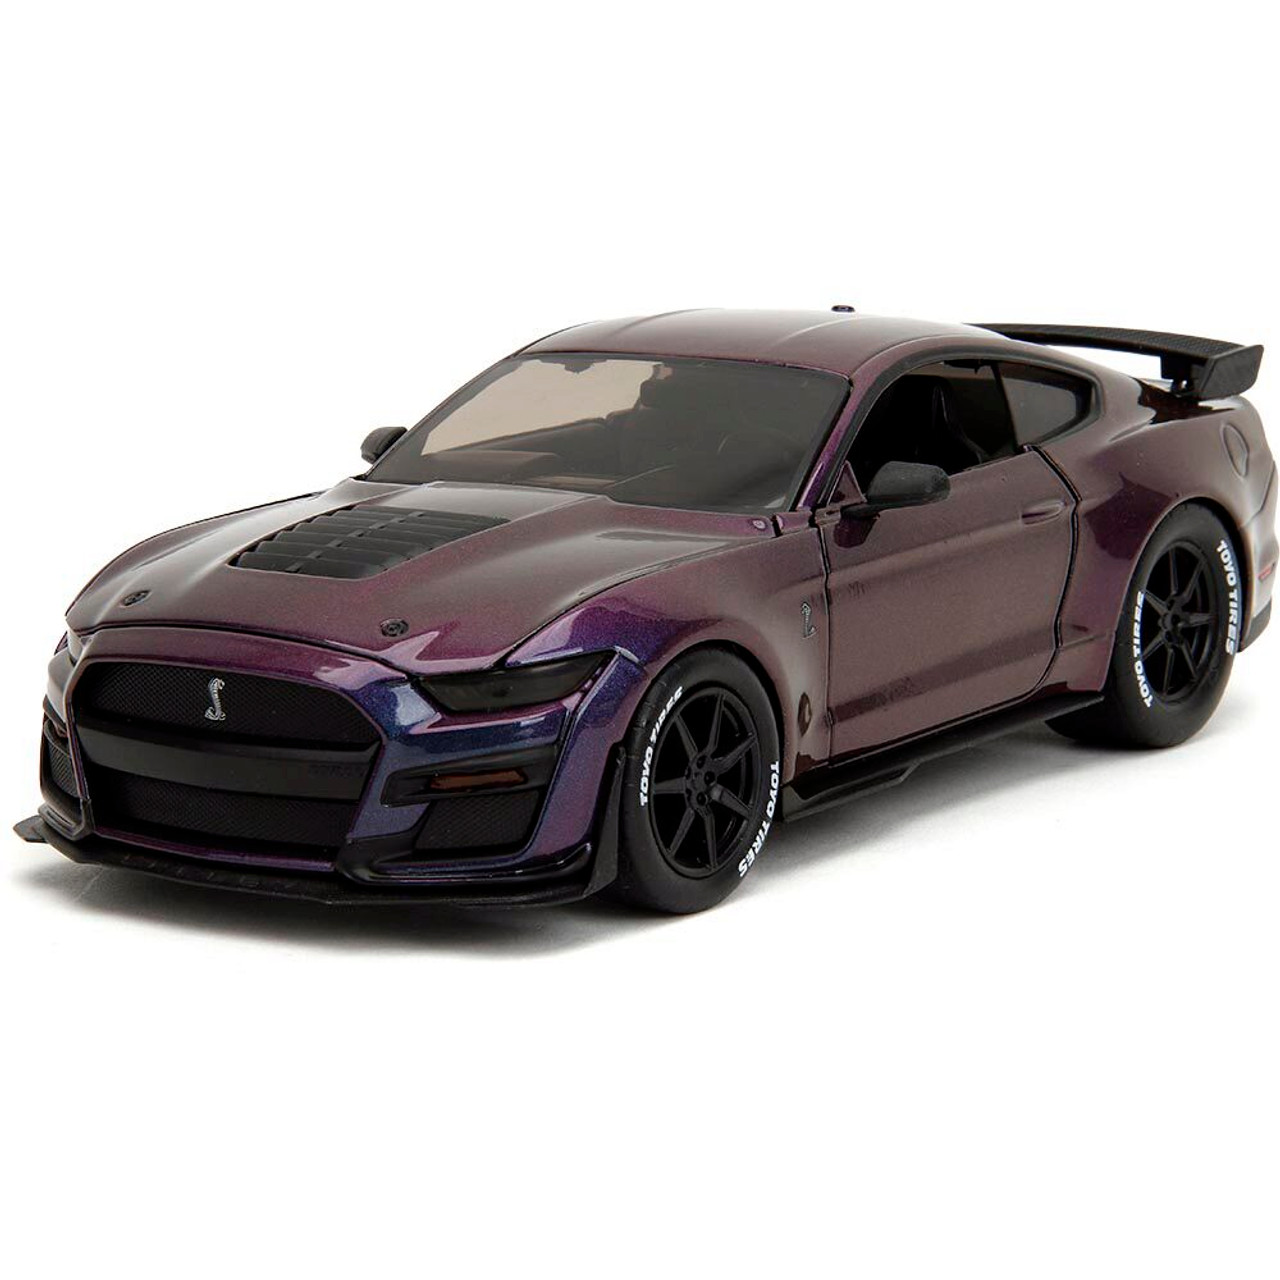 2020 Ford Mustang Shelby G.T. 500 Pink Slips